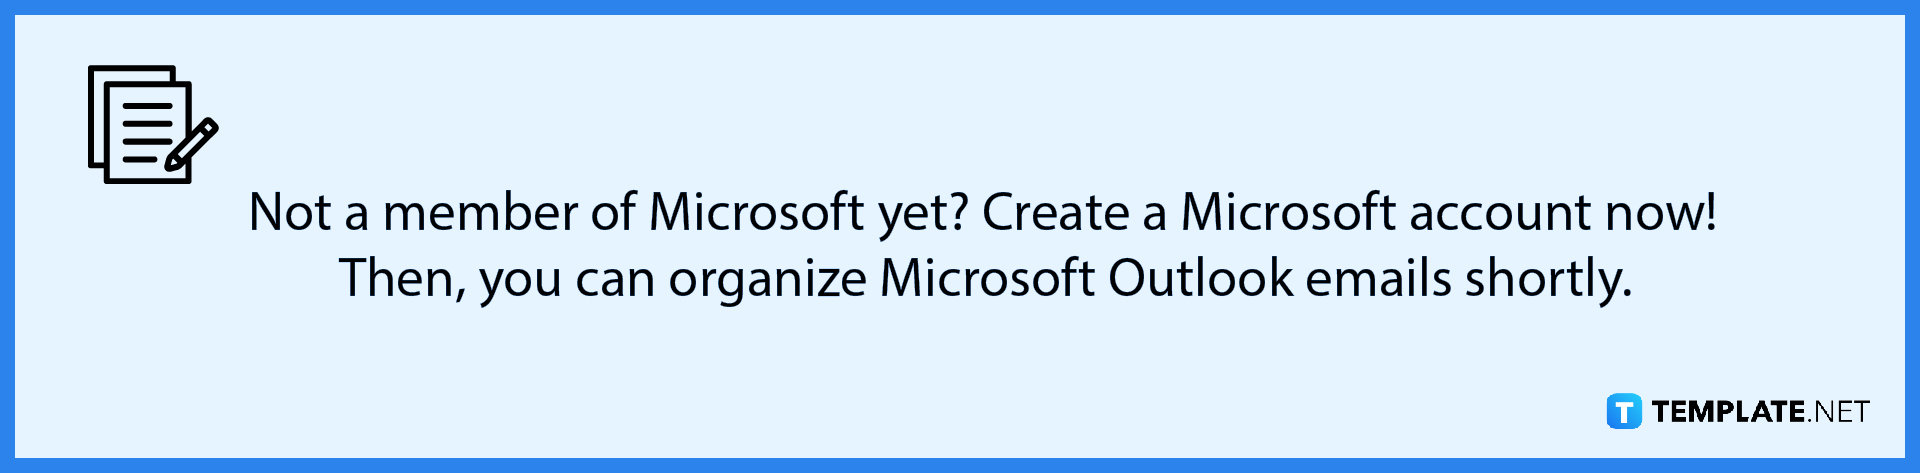 how-to-delete-all-emails-in-microsoft-outlook-note-1